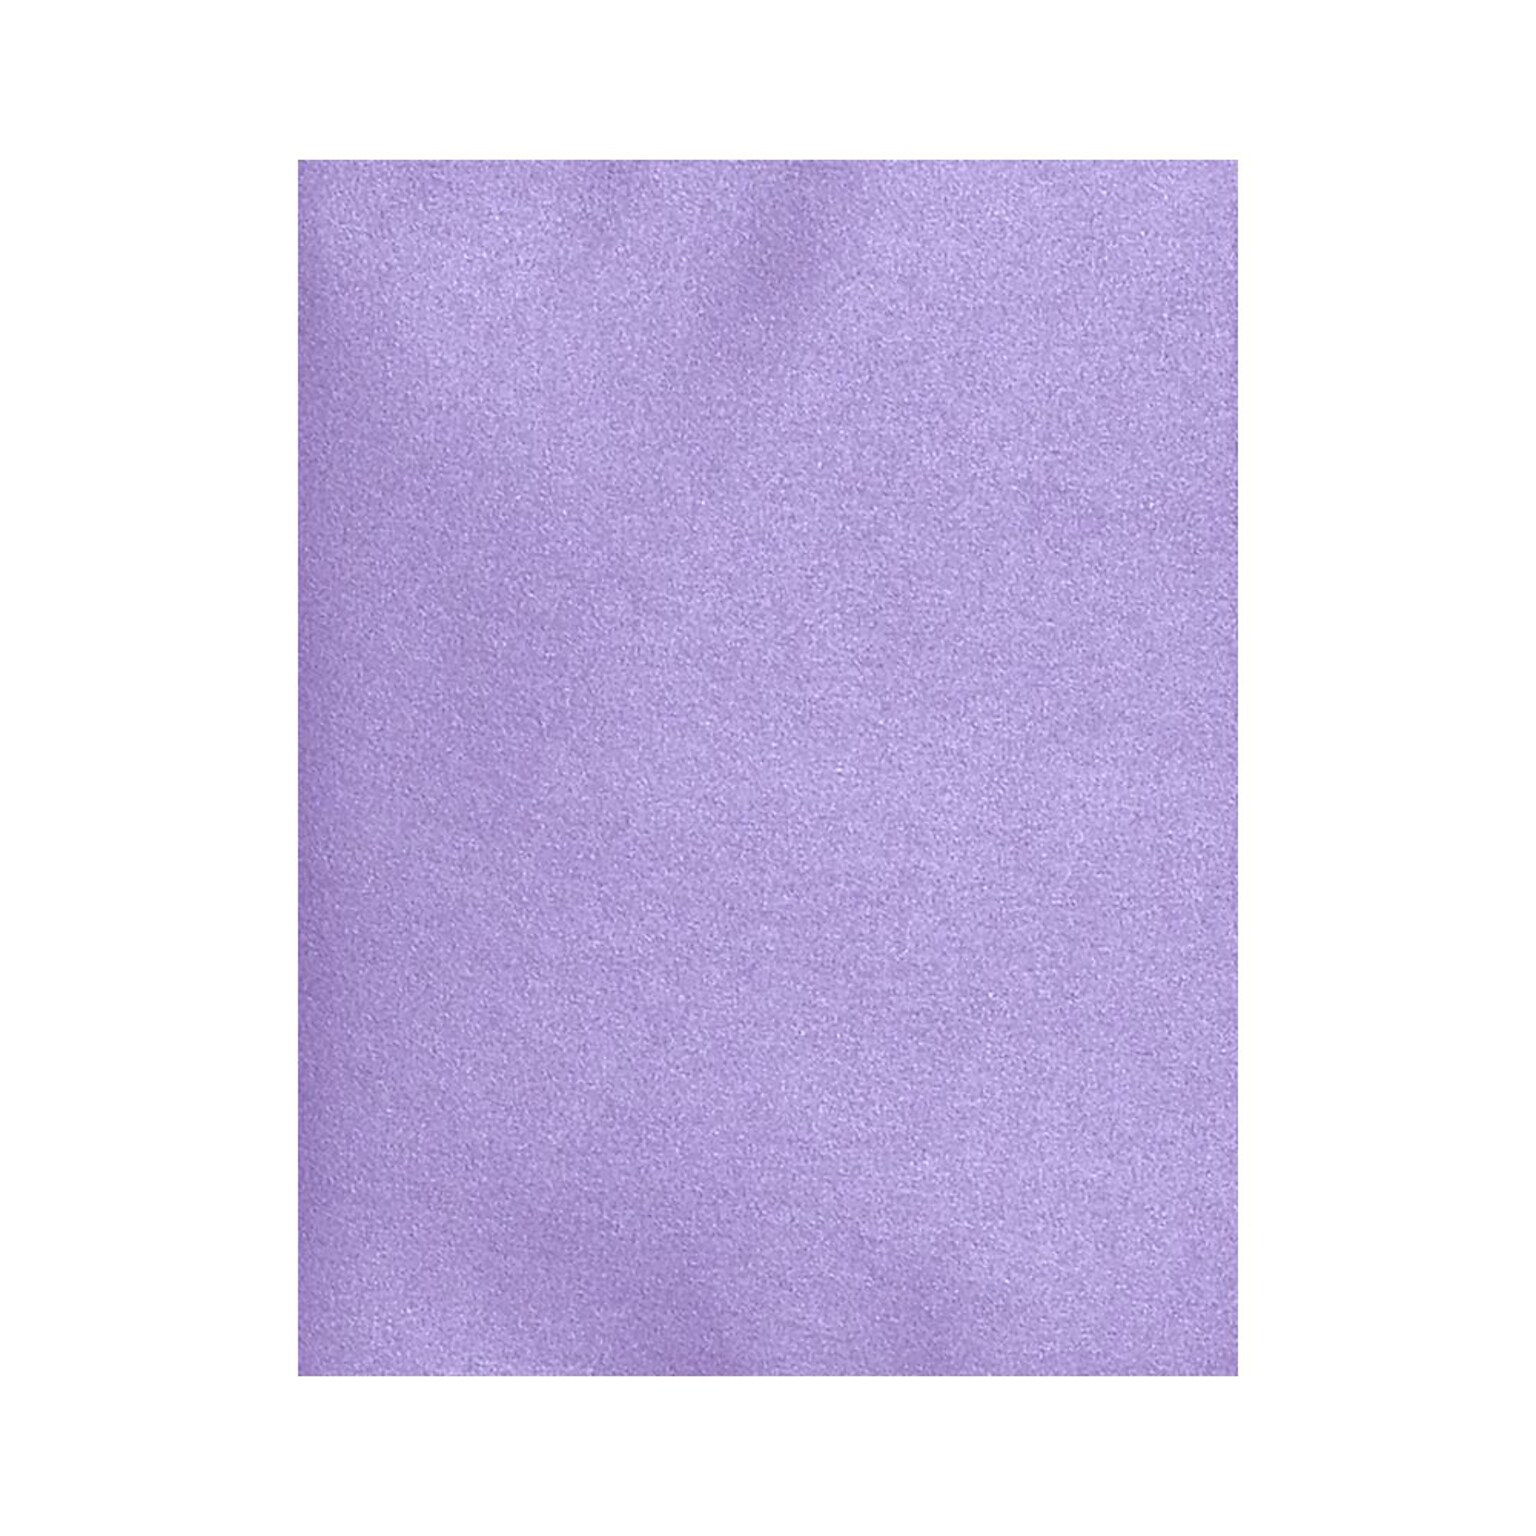 LUX 8.5 x 11 Business Paper, 32 lbs., Amethyst Purple Metallic, 50 Sheets/Pack (81211-P-04-50)